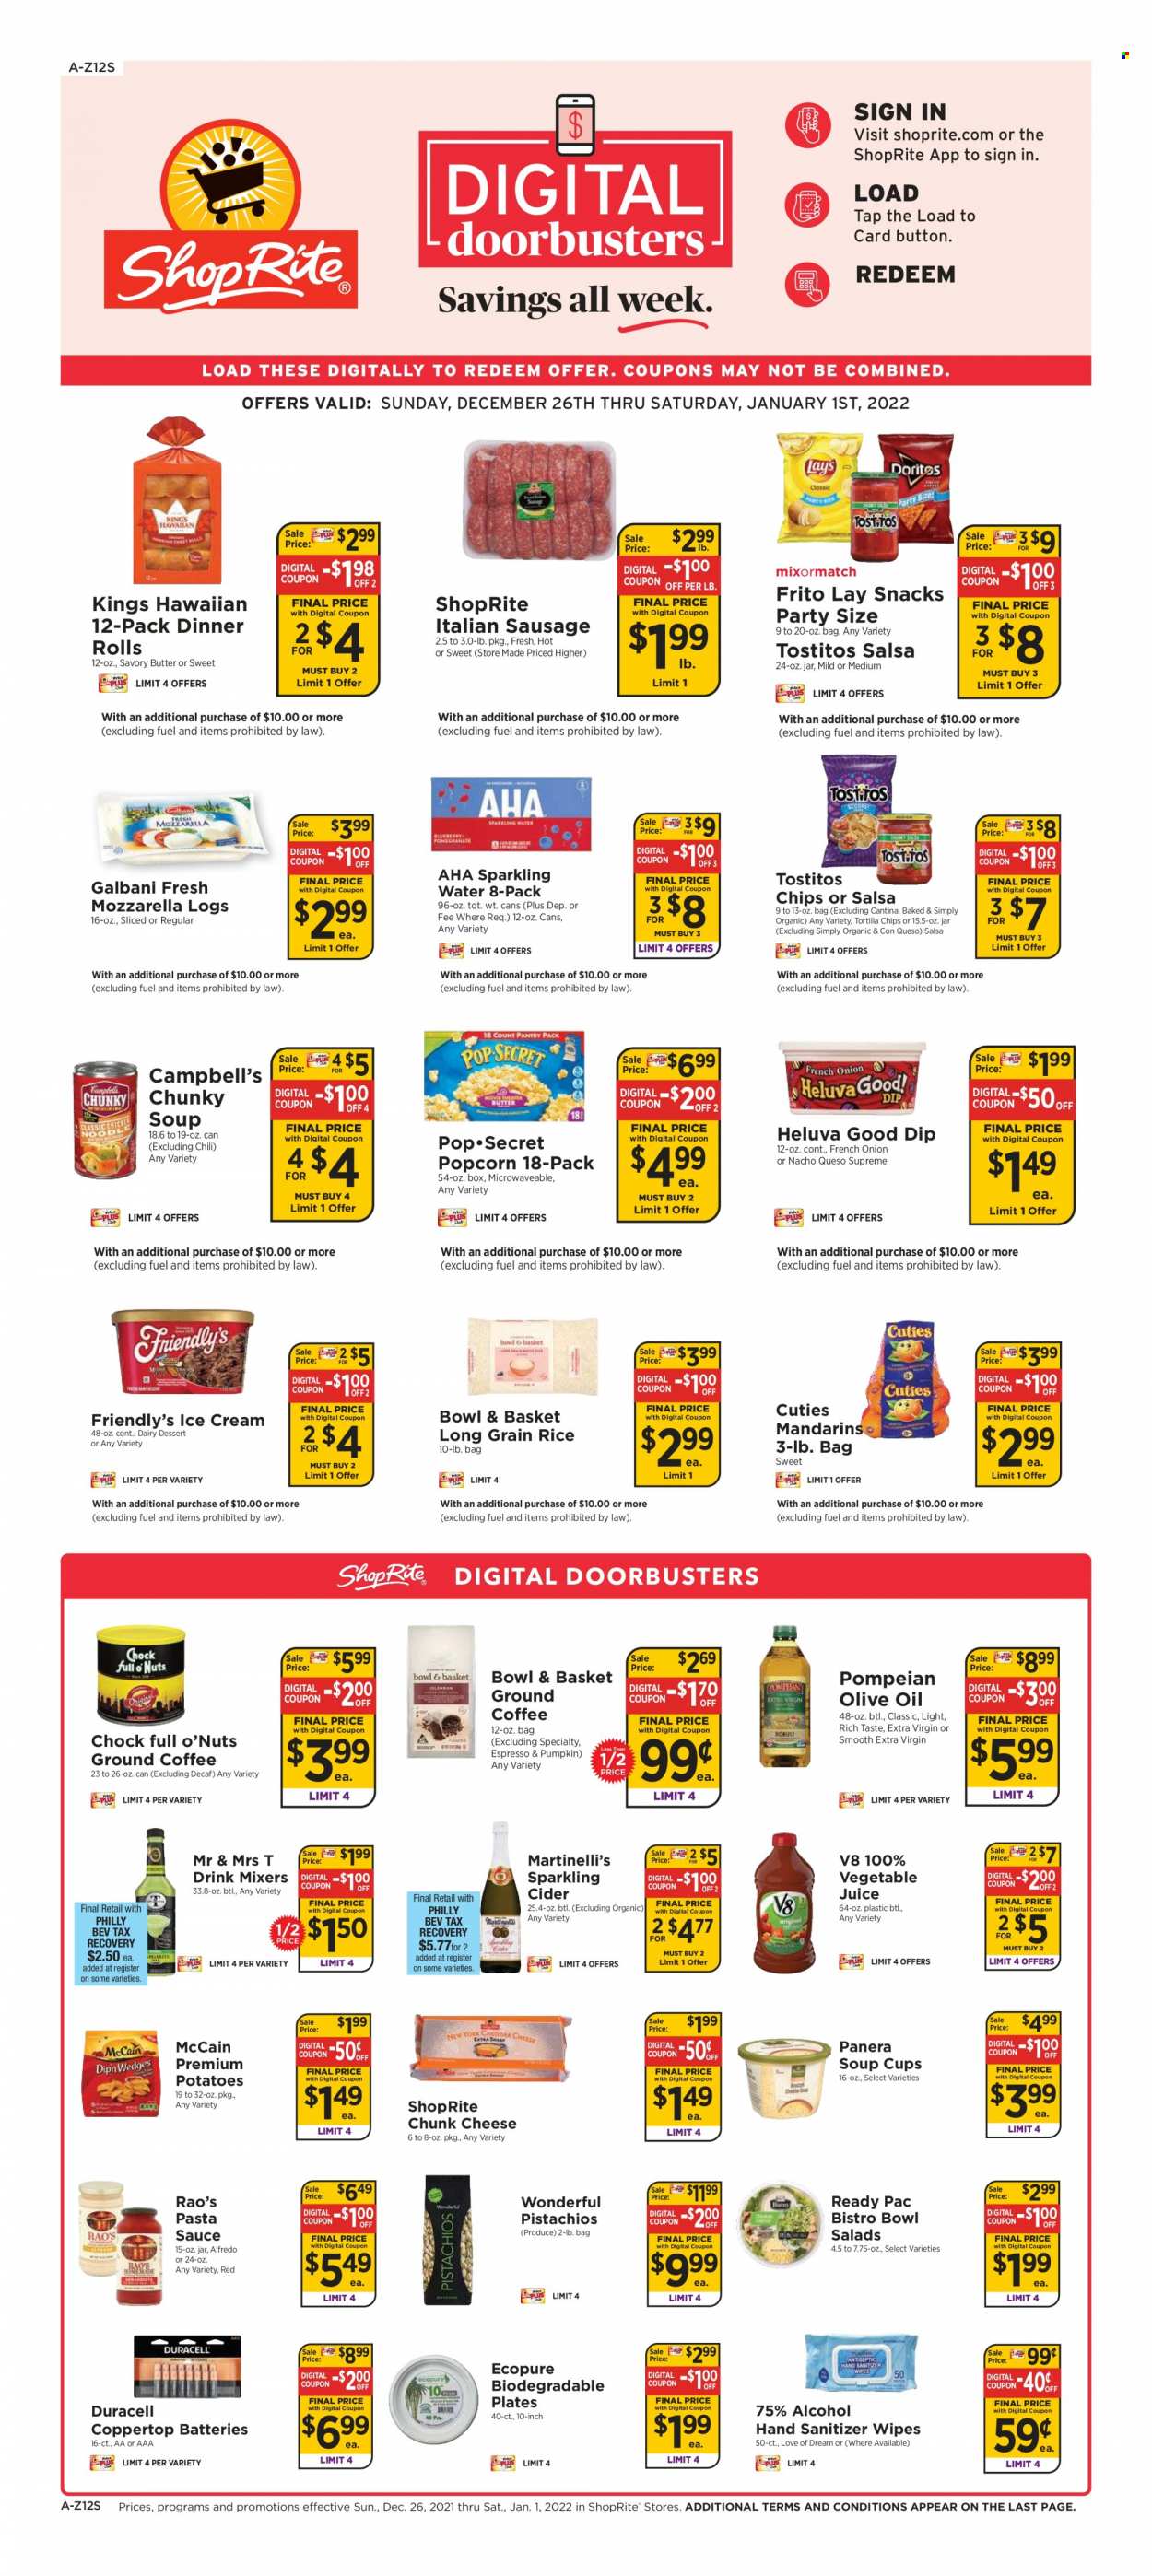 ShopRite Flyer - 12/26/2021 - 01/01/2022 - Sales products - dinner rolls, Bowl & Basket, potatoes, mandarines, Campbell's, pasta sauce, soup, sauce, Ready Pac, sausage, italian sausage, mozzarella, cheese, Galbani, chunk cheese, butter, dip, ice cream, Friendly's Ice Cream, McCain, snack, tortilla chips, chips, popcorn, Tostitos, rice, long grain rice, salsa, extra virgin olive oil, olive oil, oil, nuts, pistachios, juice, vegetable juice, sparkling water, sparkling cider, sparkling wine, cider, wipes, plate, cup, battery, Duracell. Page 1.